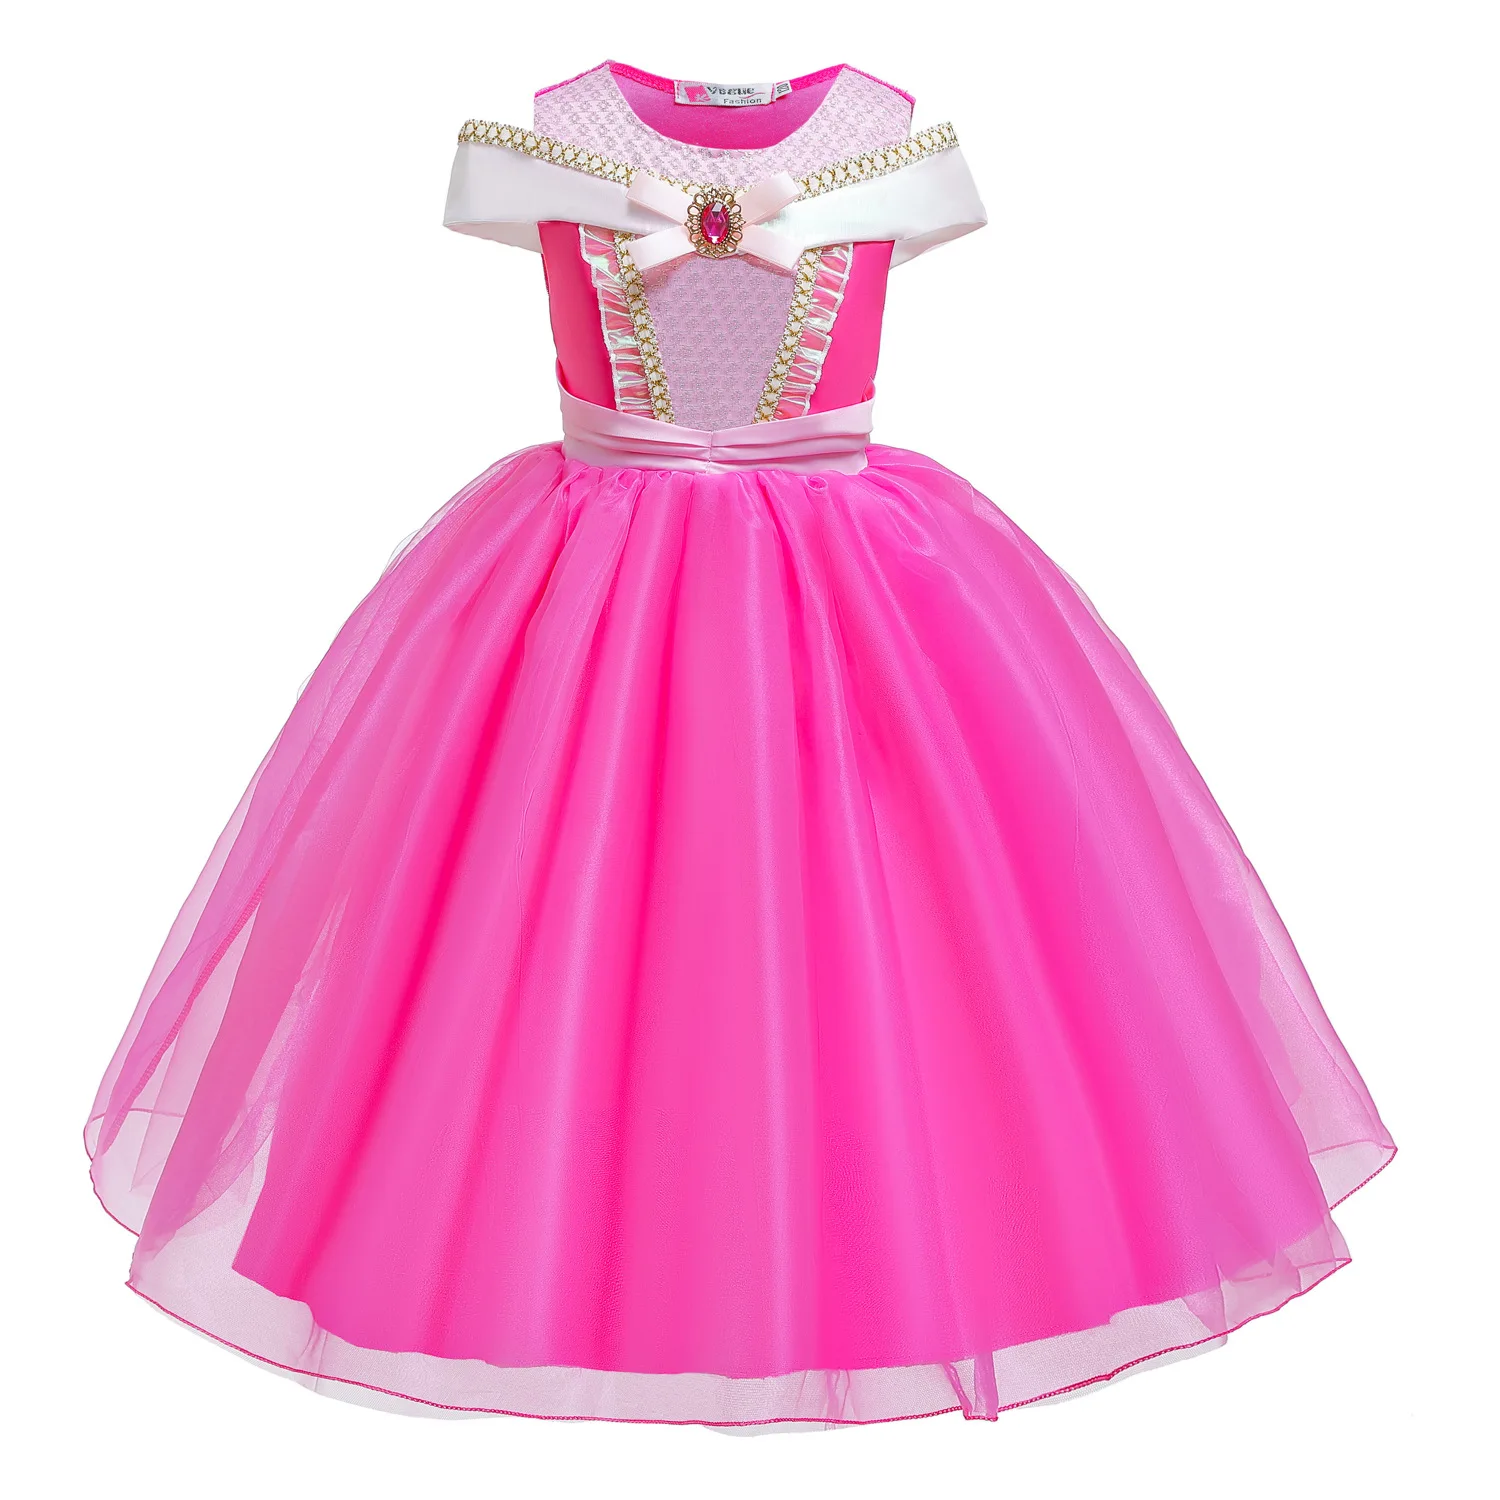 

Frozen Fancy Movie Clothing Sleeping Beauty Girls Dress Christmas Princess Cosplay Costume Dresses Girl for halloween Party